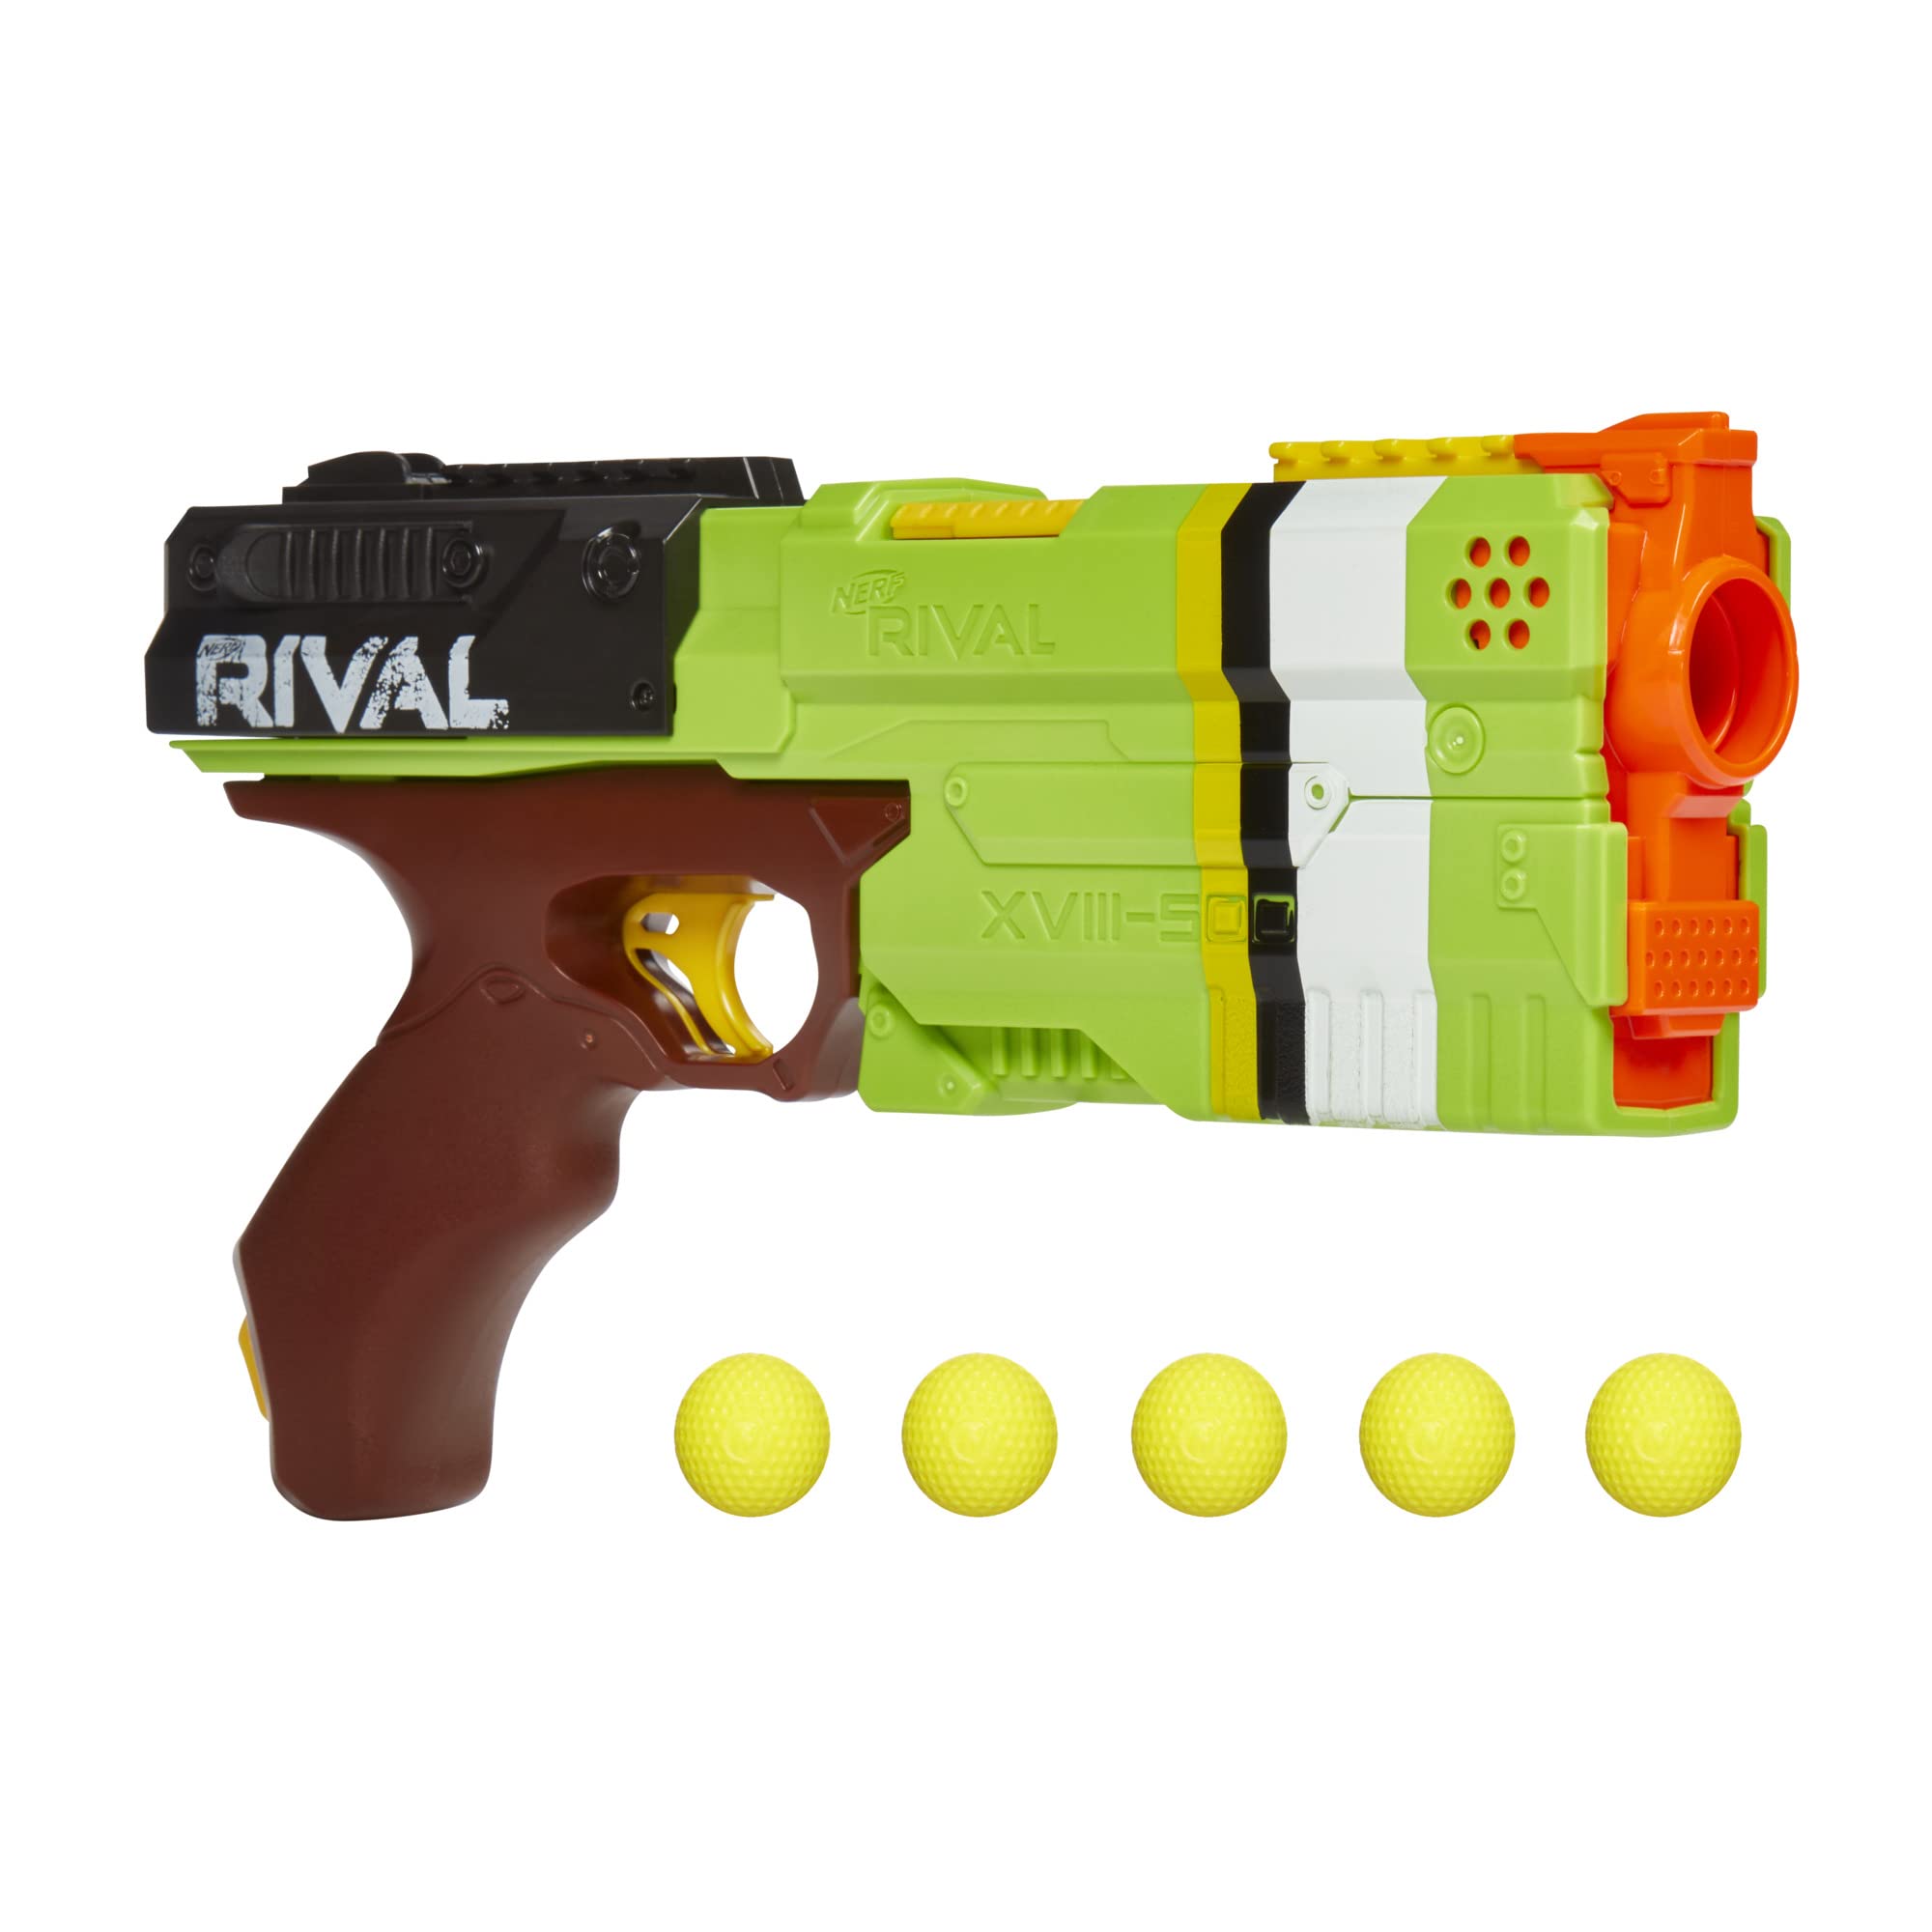 Nerf Rivals: Kronos XVIII-500 Blaster w/ 5 Rival Rounds (Green) $7 + Free Shipping w/ Prime or on orders over $35